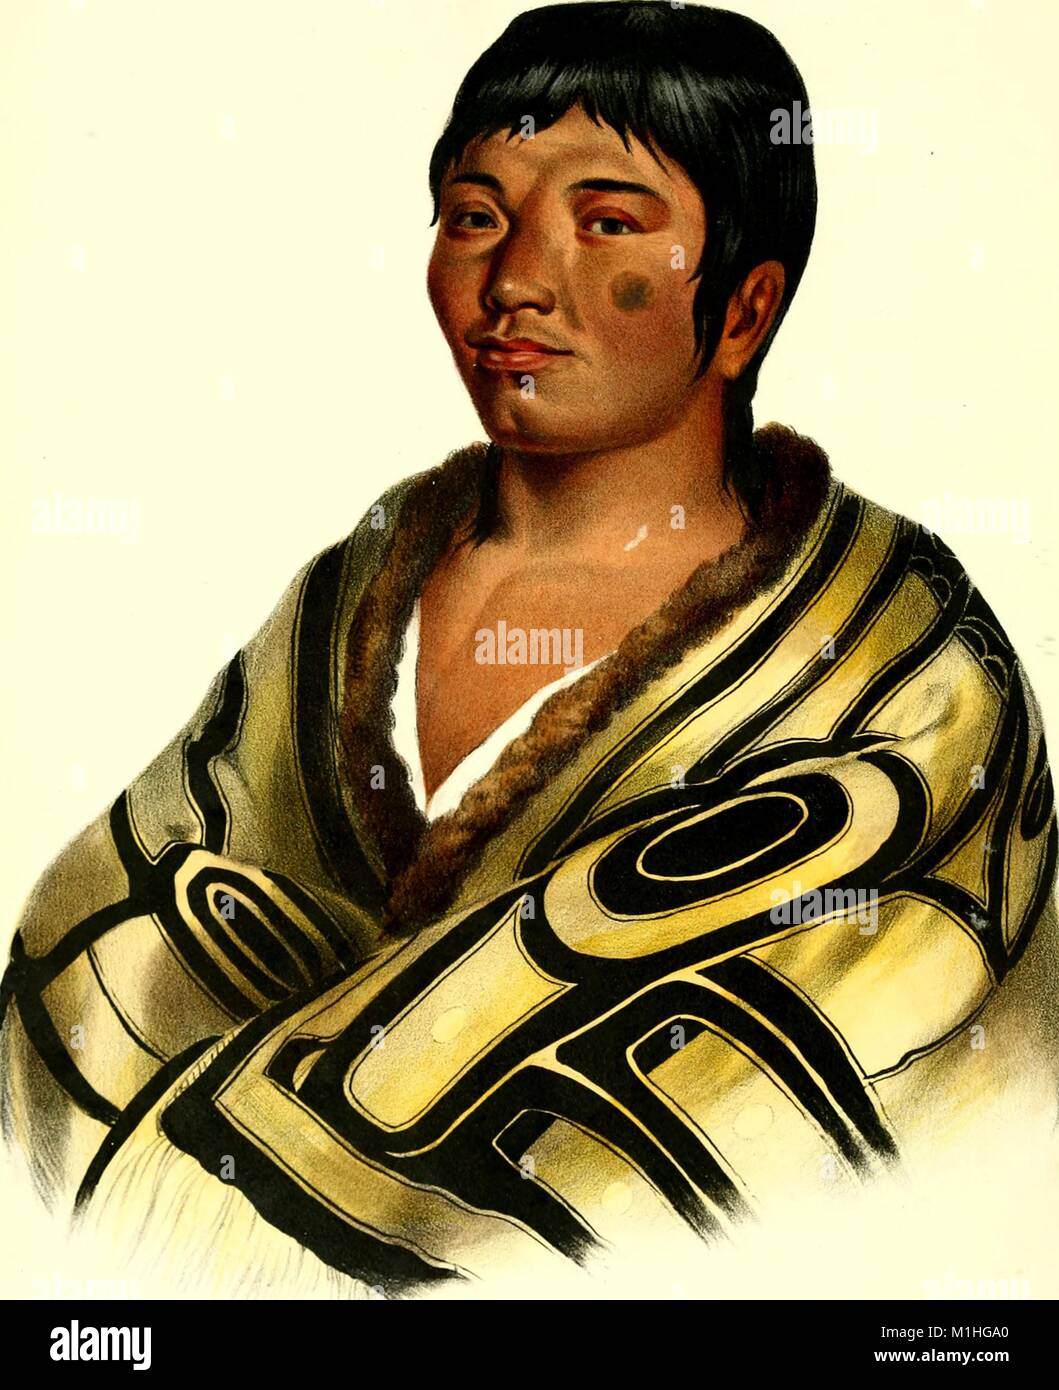 Head-shot, color illustration of a Flathead or Chinook Nation man named Stumanu wearing a painted, animal hide cape with a Salish design, from the book 'Indian Biography' authored by Thatcher BB (Benjamin Bussy), 1825. Courtesy Internet Archive. () Stock Photo